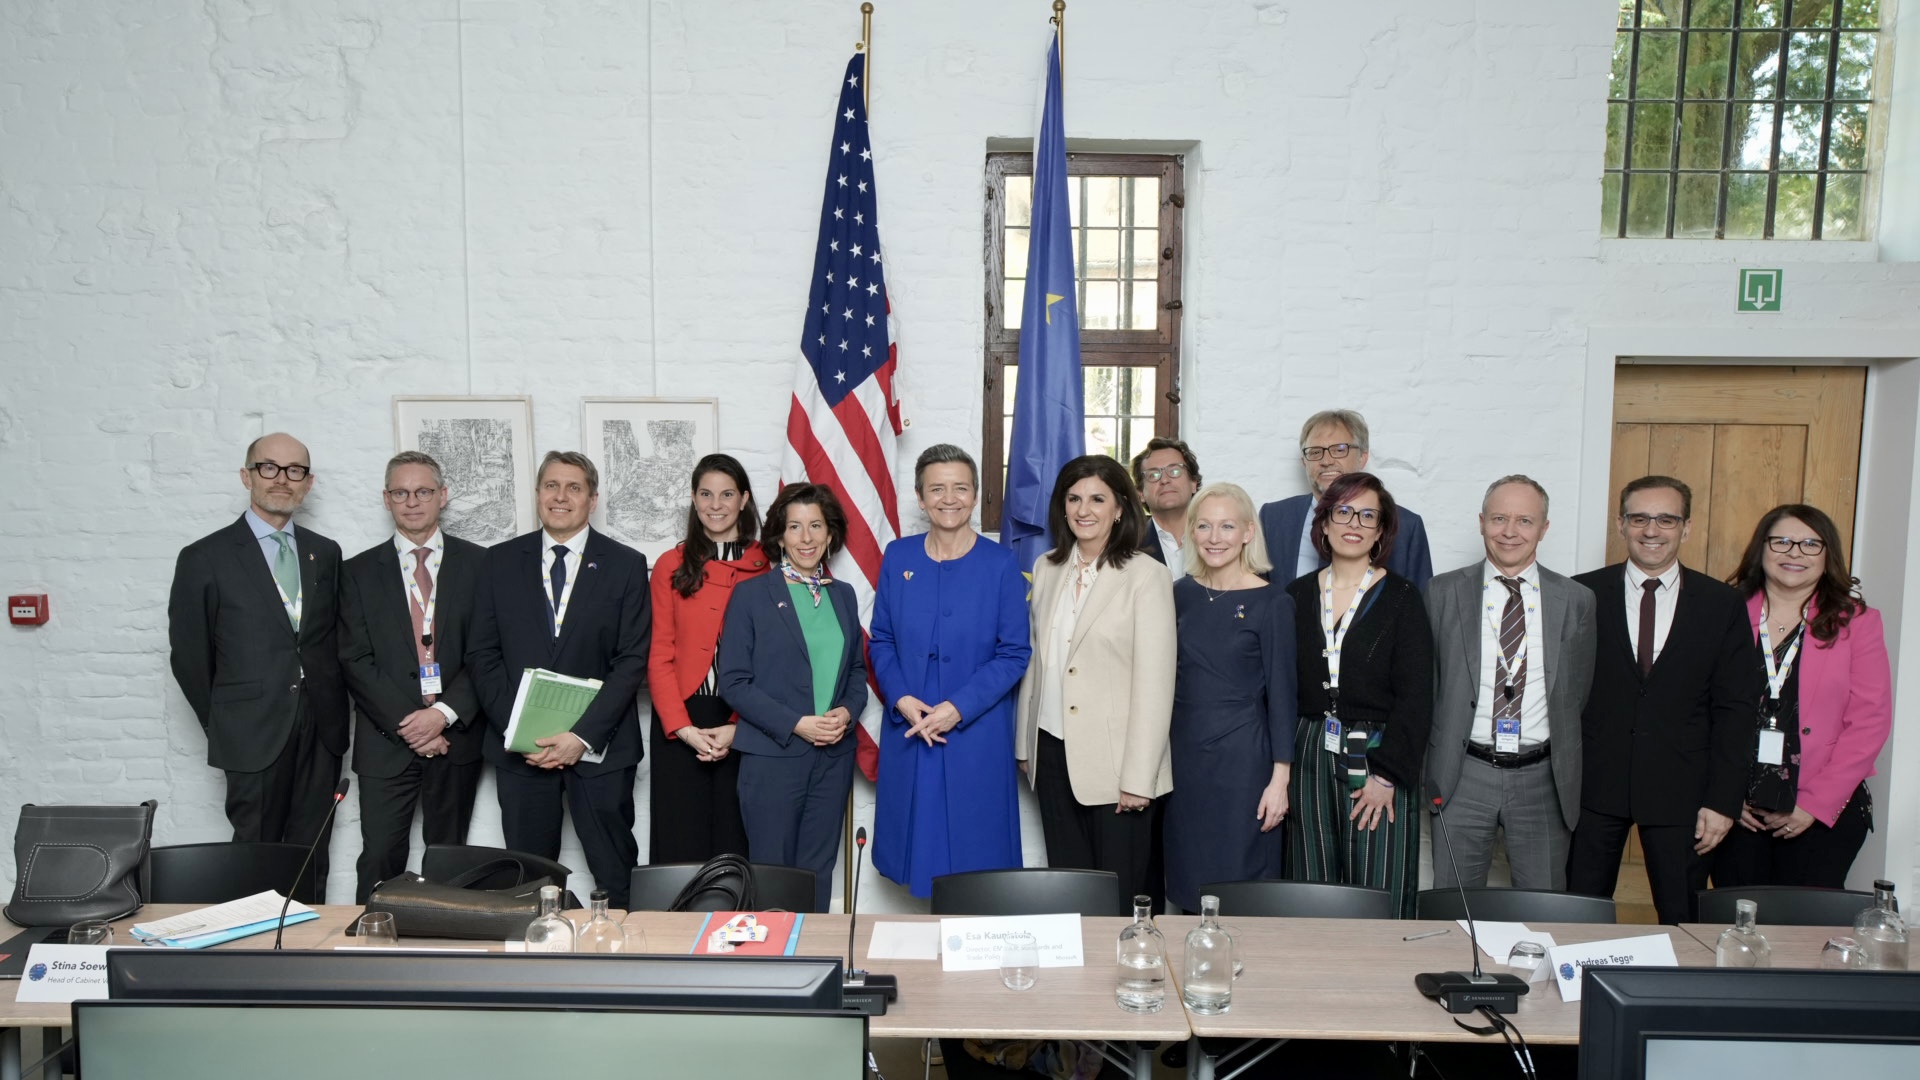 Executive Vice President of the European Commission and Commissioner for Competition Margaret Vestager and US Secretary of Commerce Gina Raimondo join Consortium members in Belgium